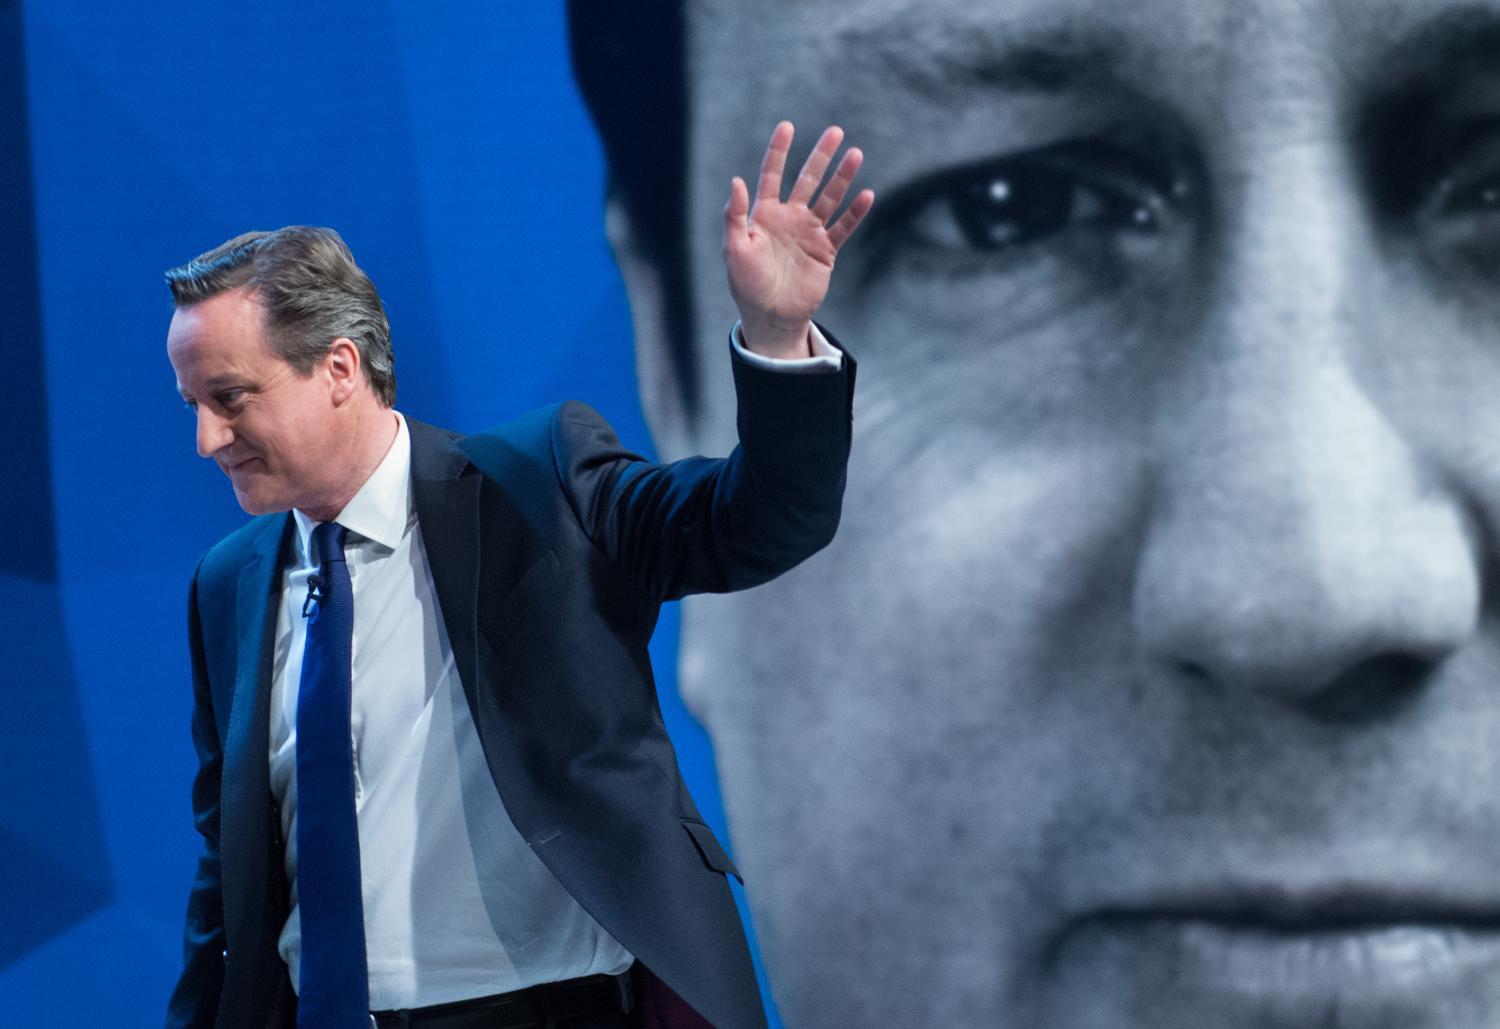 Vale David Cameron: His only legacy a massive miscalculation